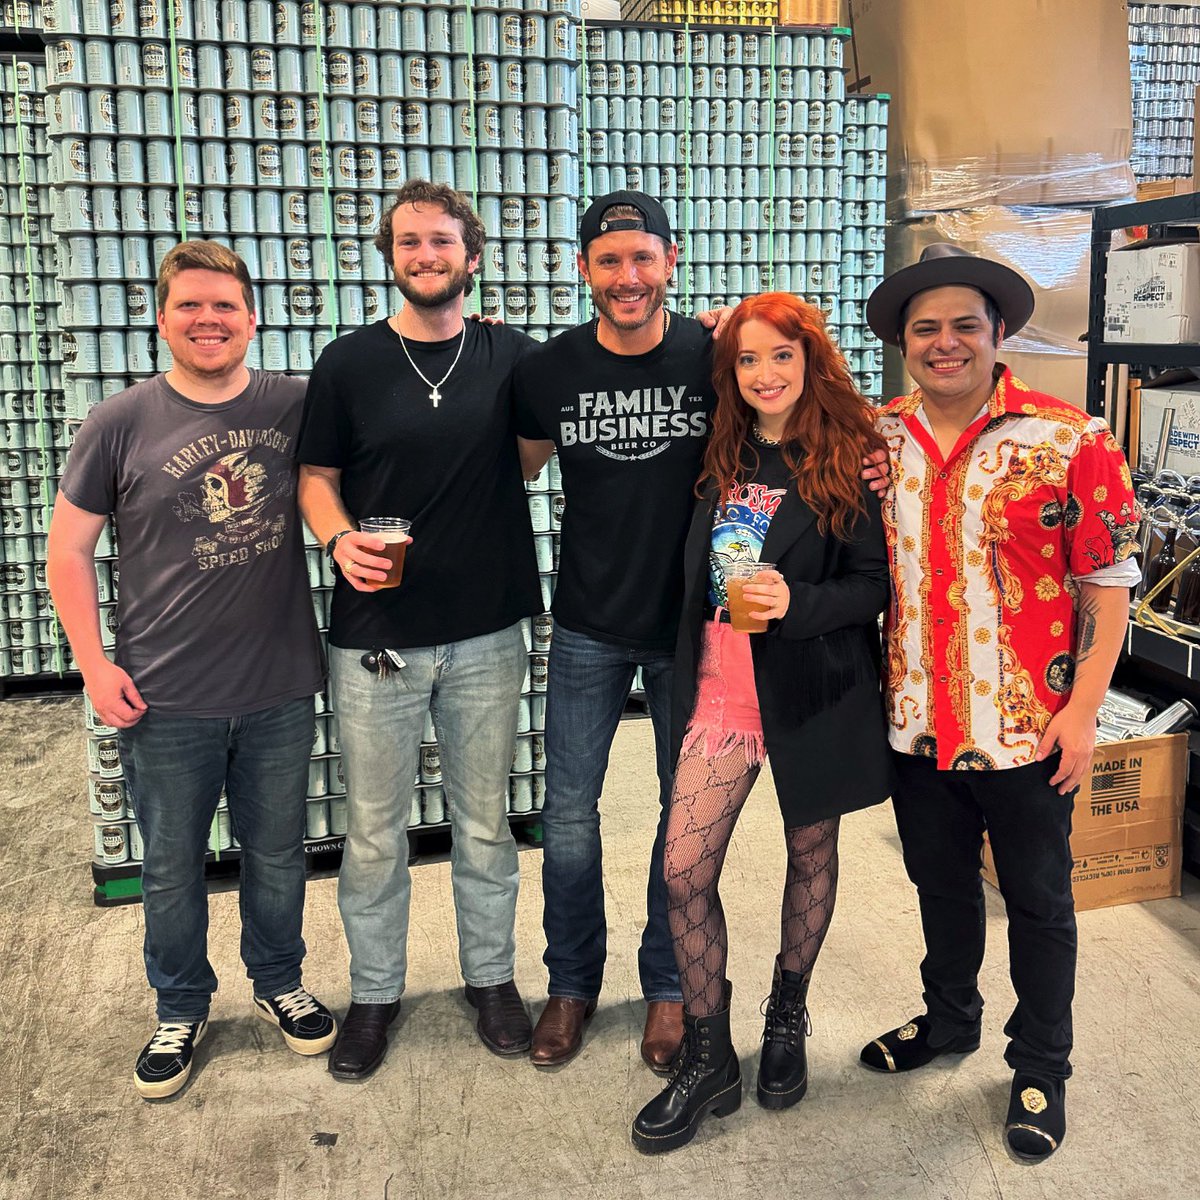 As a band, we were on Cloud 9 yesterday 🤘🏼 we love performing at @TheFamilyBeer but getting to talk to @JensenAckles this go around was even better. As always, thank you for having us! #atx #atxlivemusic #livemusic #coverband #FBBCmemberparty #JensenAckles